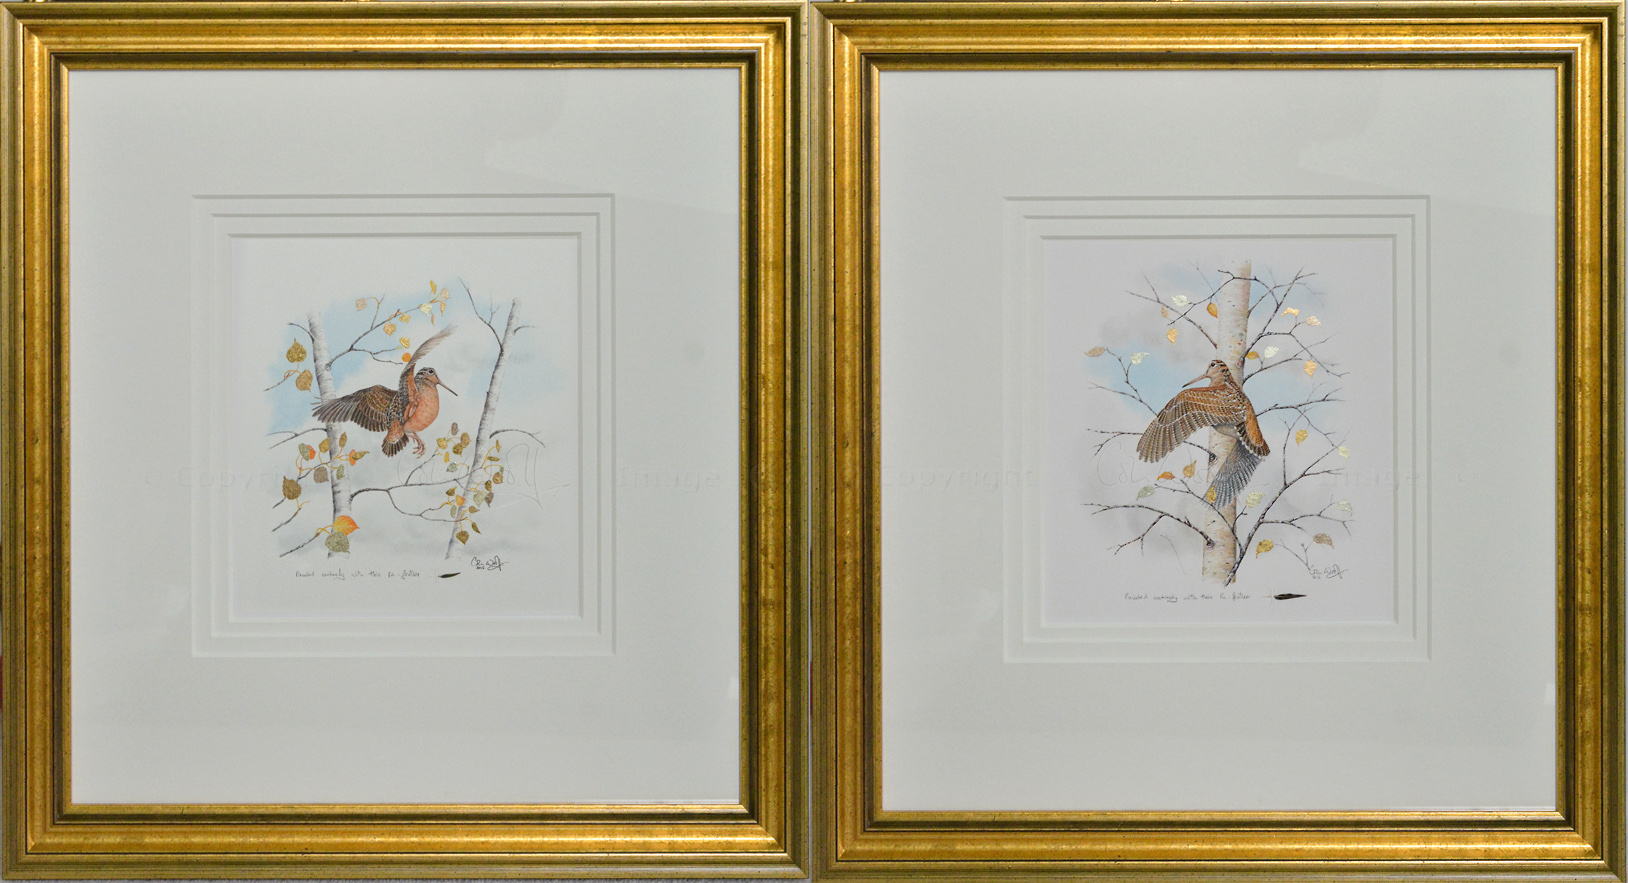 Woodcock pin-feather pair in gold leaf by Colin Woolf